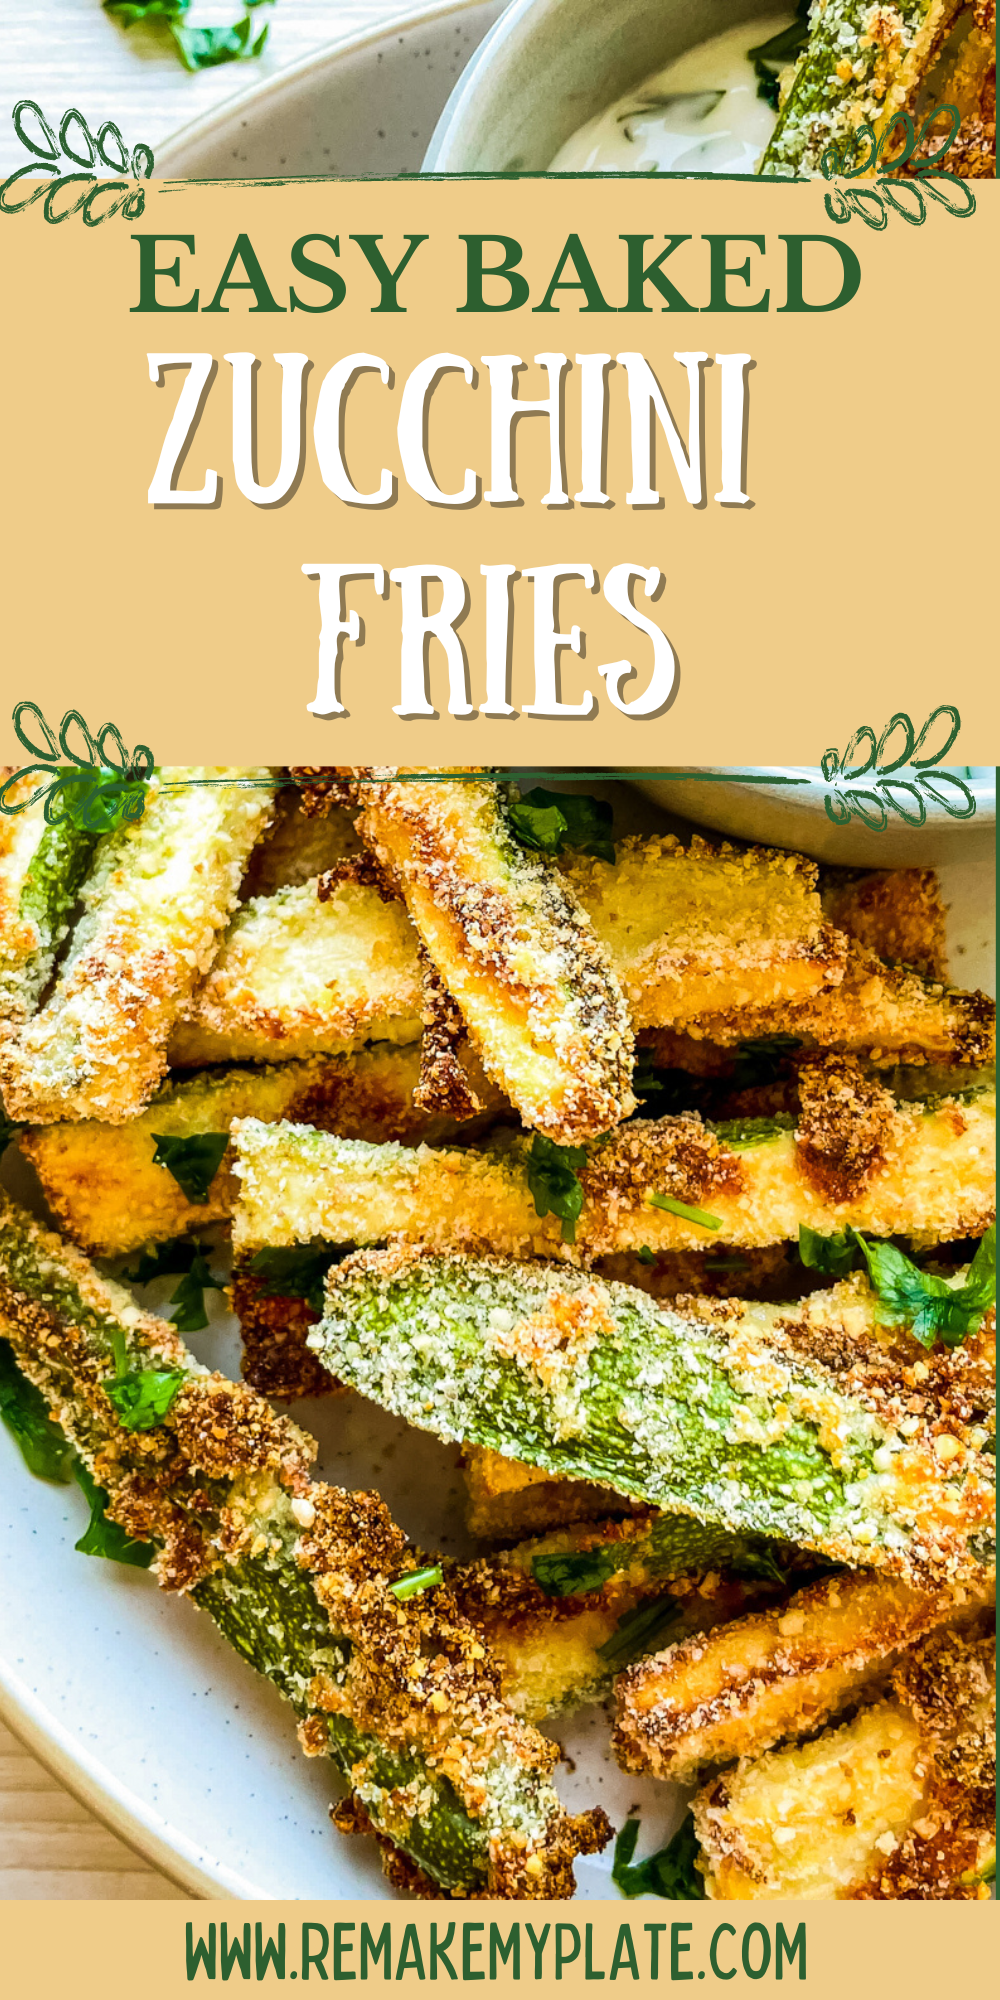 Easy Baked Zucchini Fries Recipe